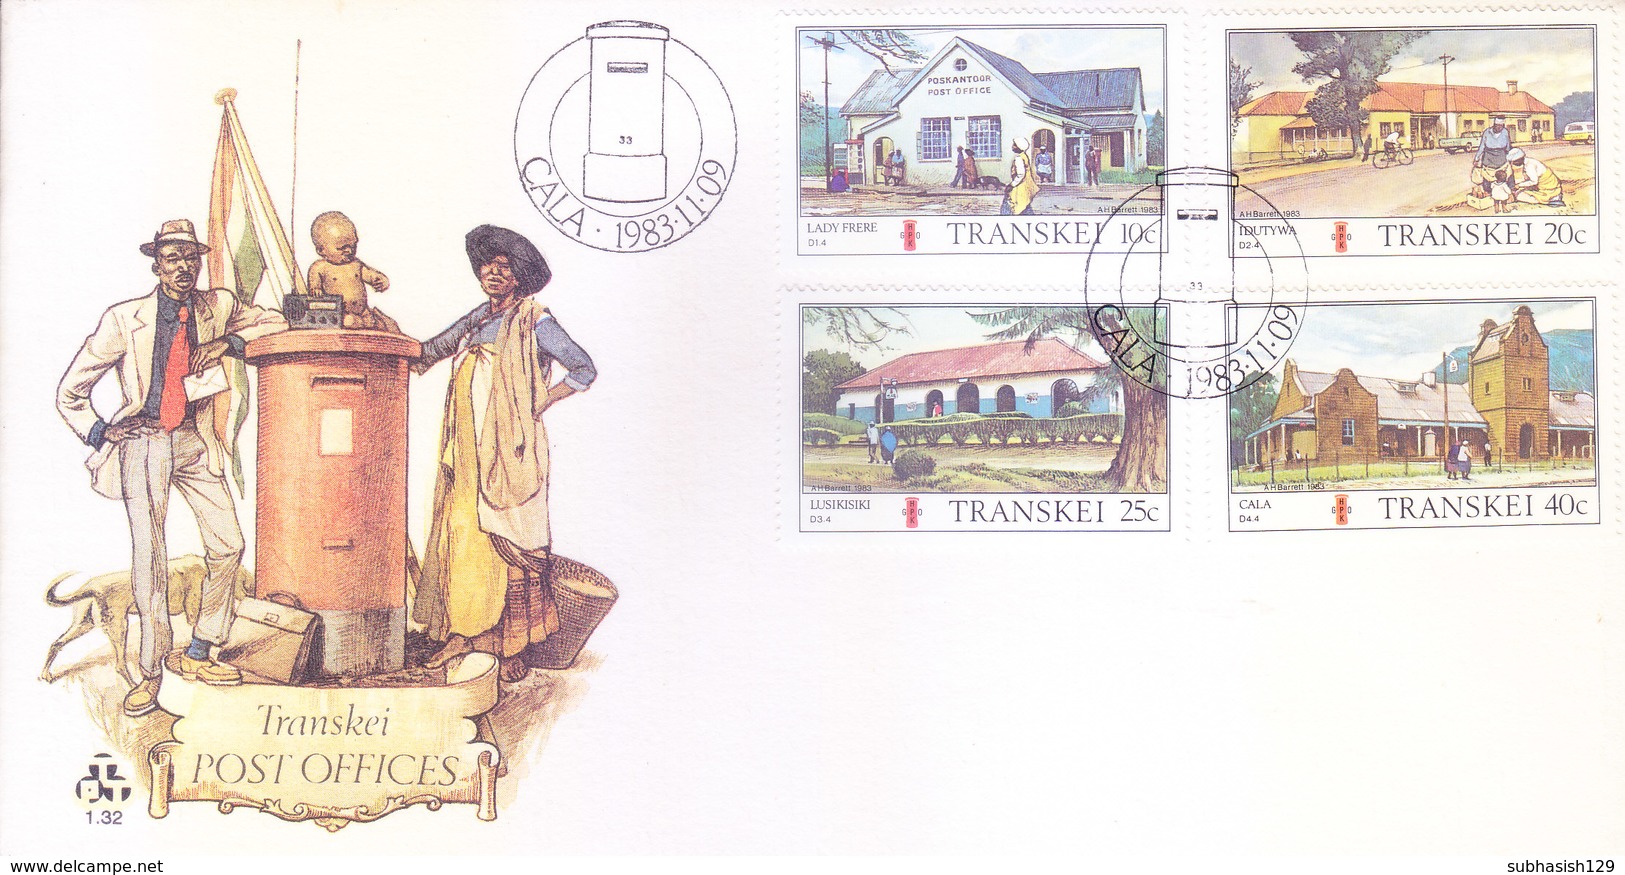 TRANSKEI / SOUTH AFRICA : FIRST DAY COVER WITH INFORMATION BROCHURE INSIDE : TRANSKEI POST OFFICES - 09-11-1983 - Transkei